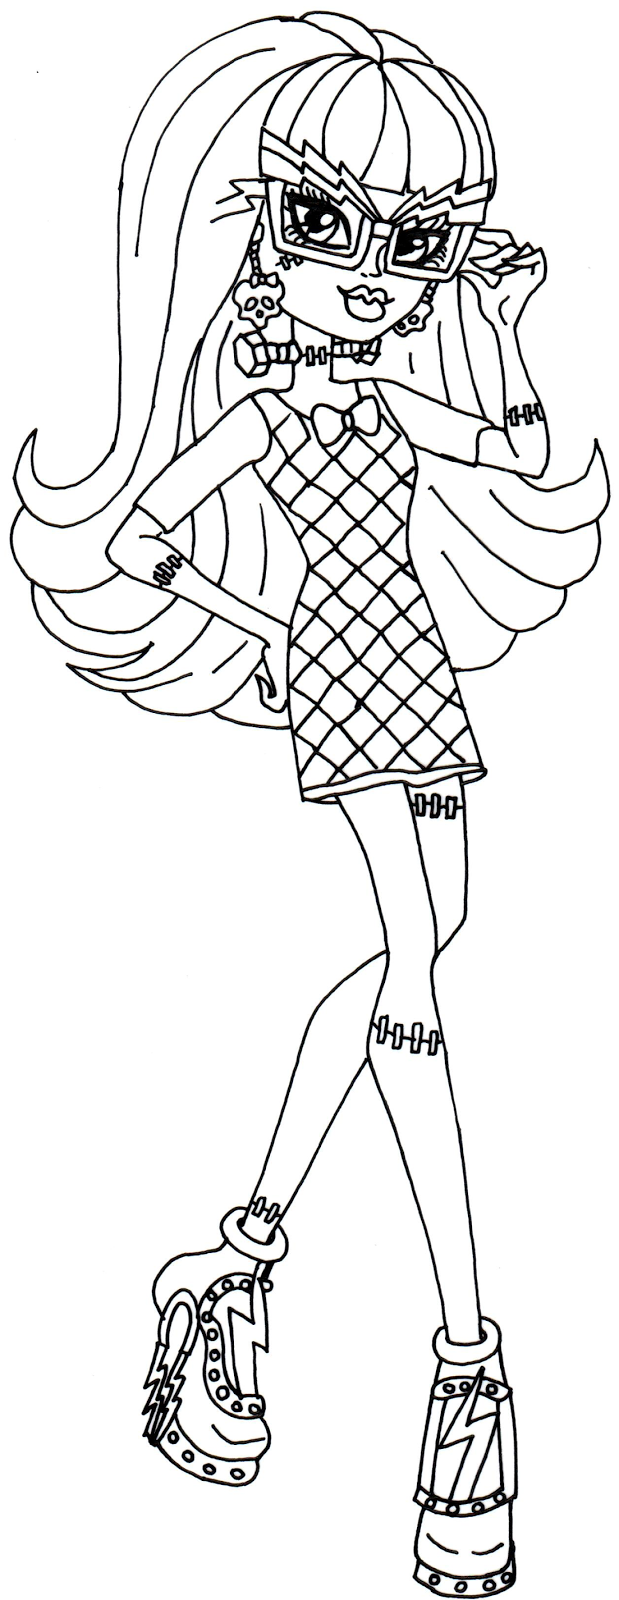 Download Free Printable Monster High Coloring Pages: Frankie Stein Geek Shriek Monster High Coloring Page